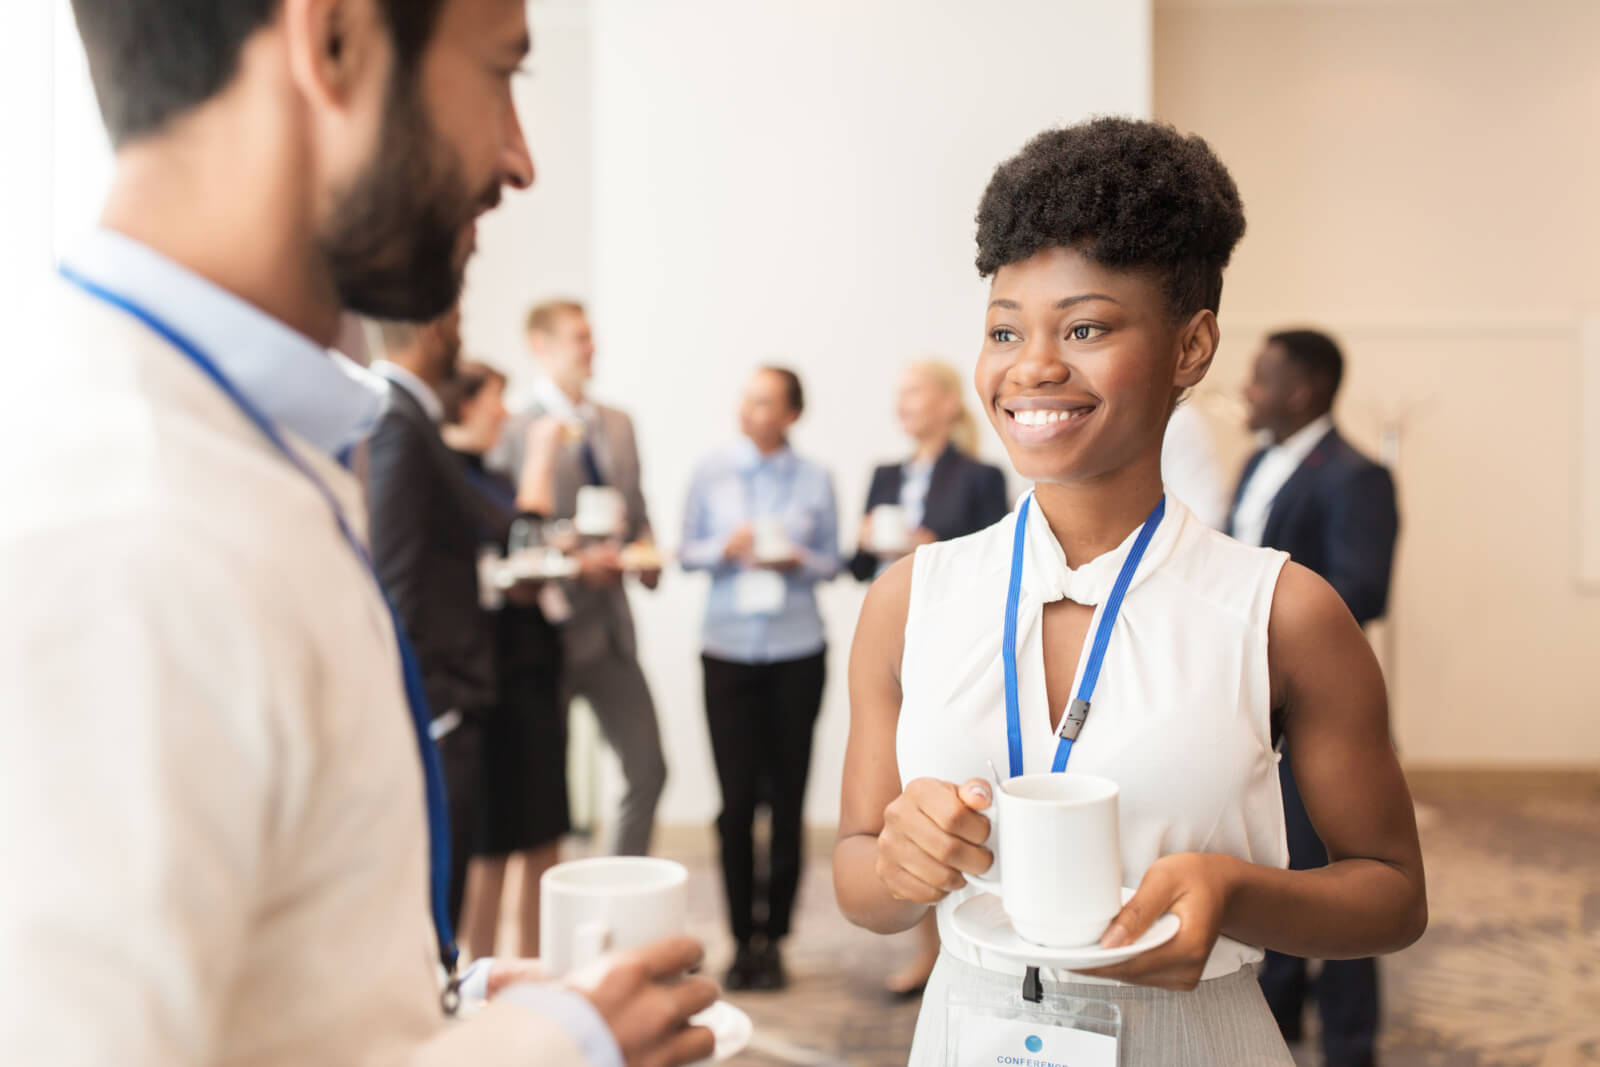 Want a Fulfilling Career? Stop Networking and Start Building Genuine Relationships